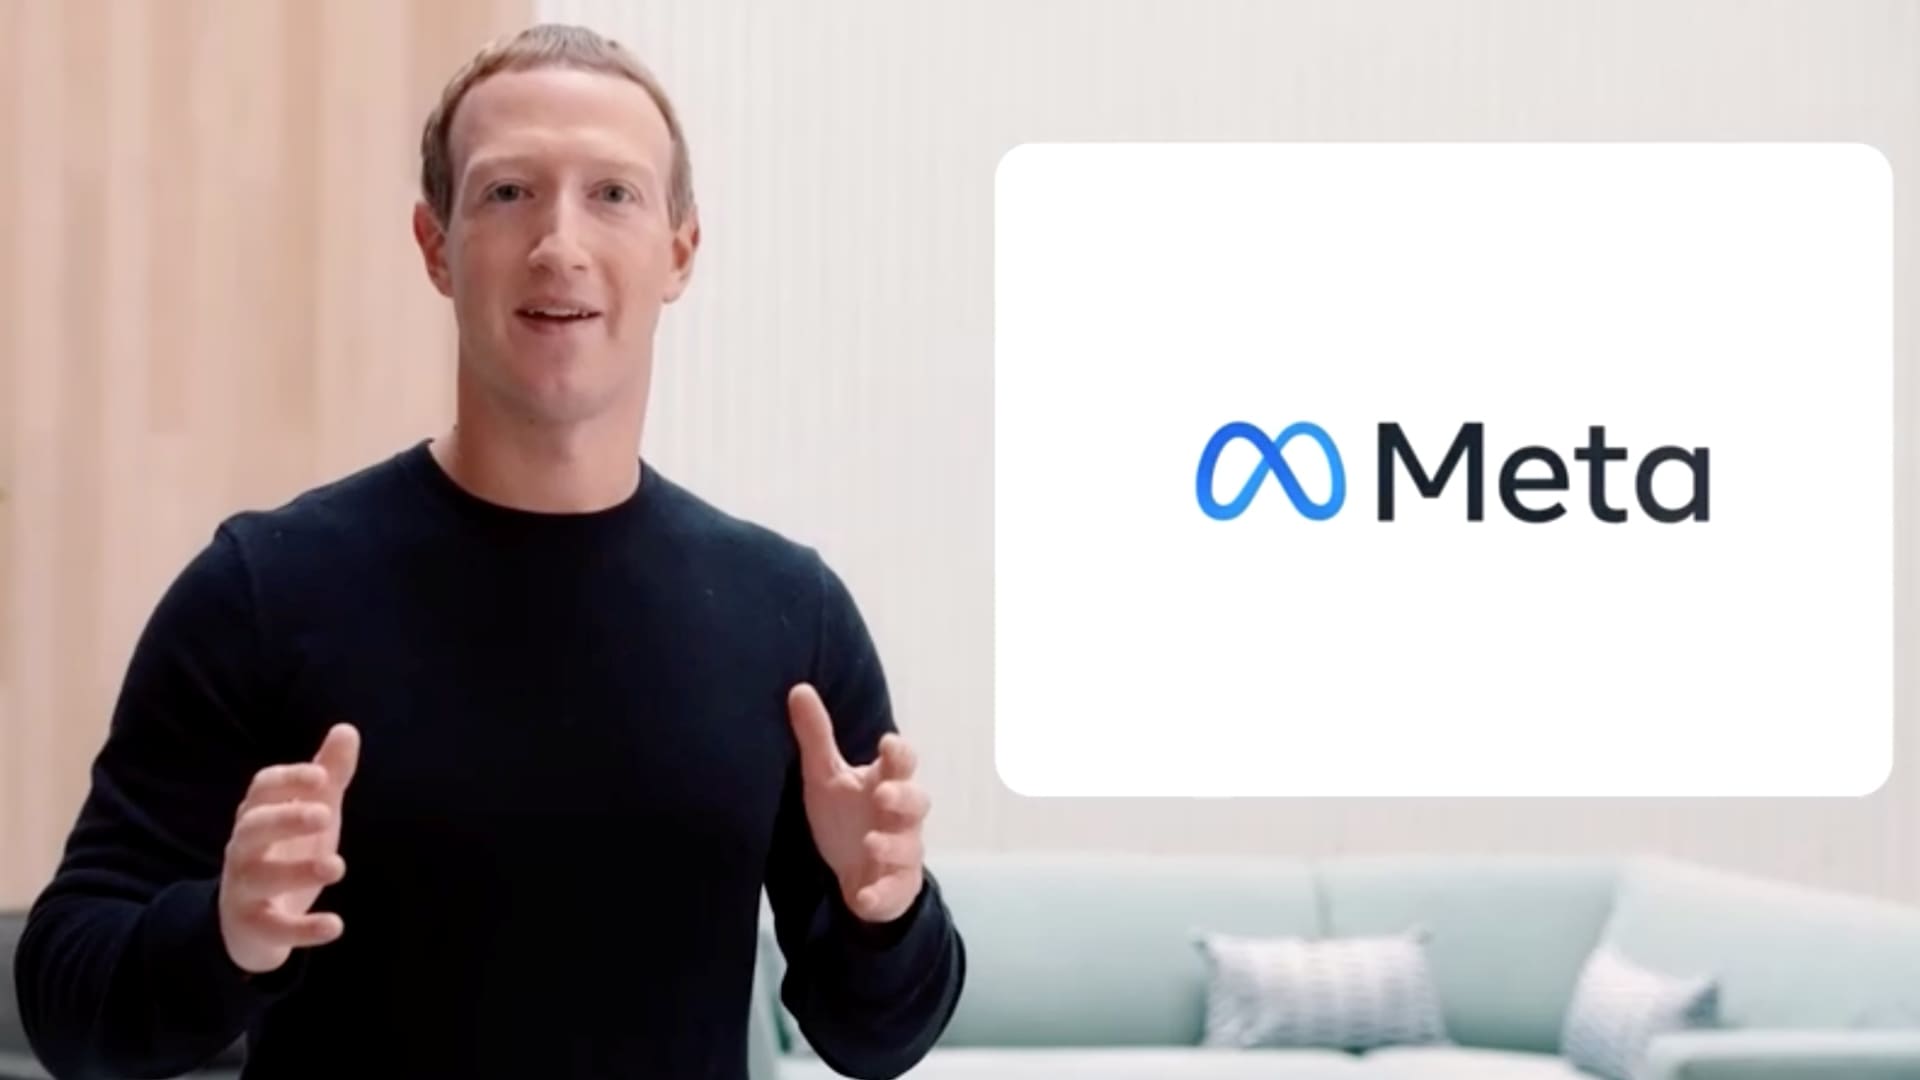 Mark Zuckerberg is spending most of his time on A.I., says Meta CTO